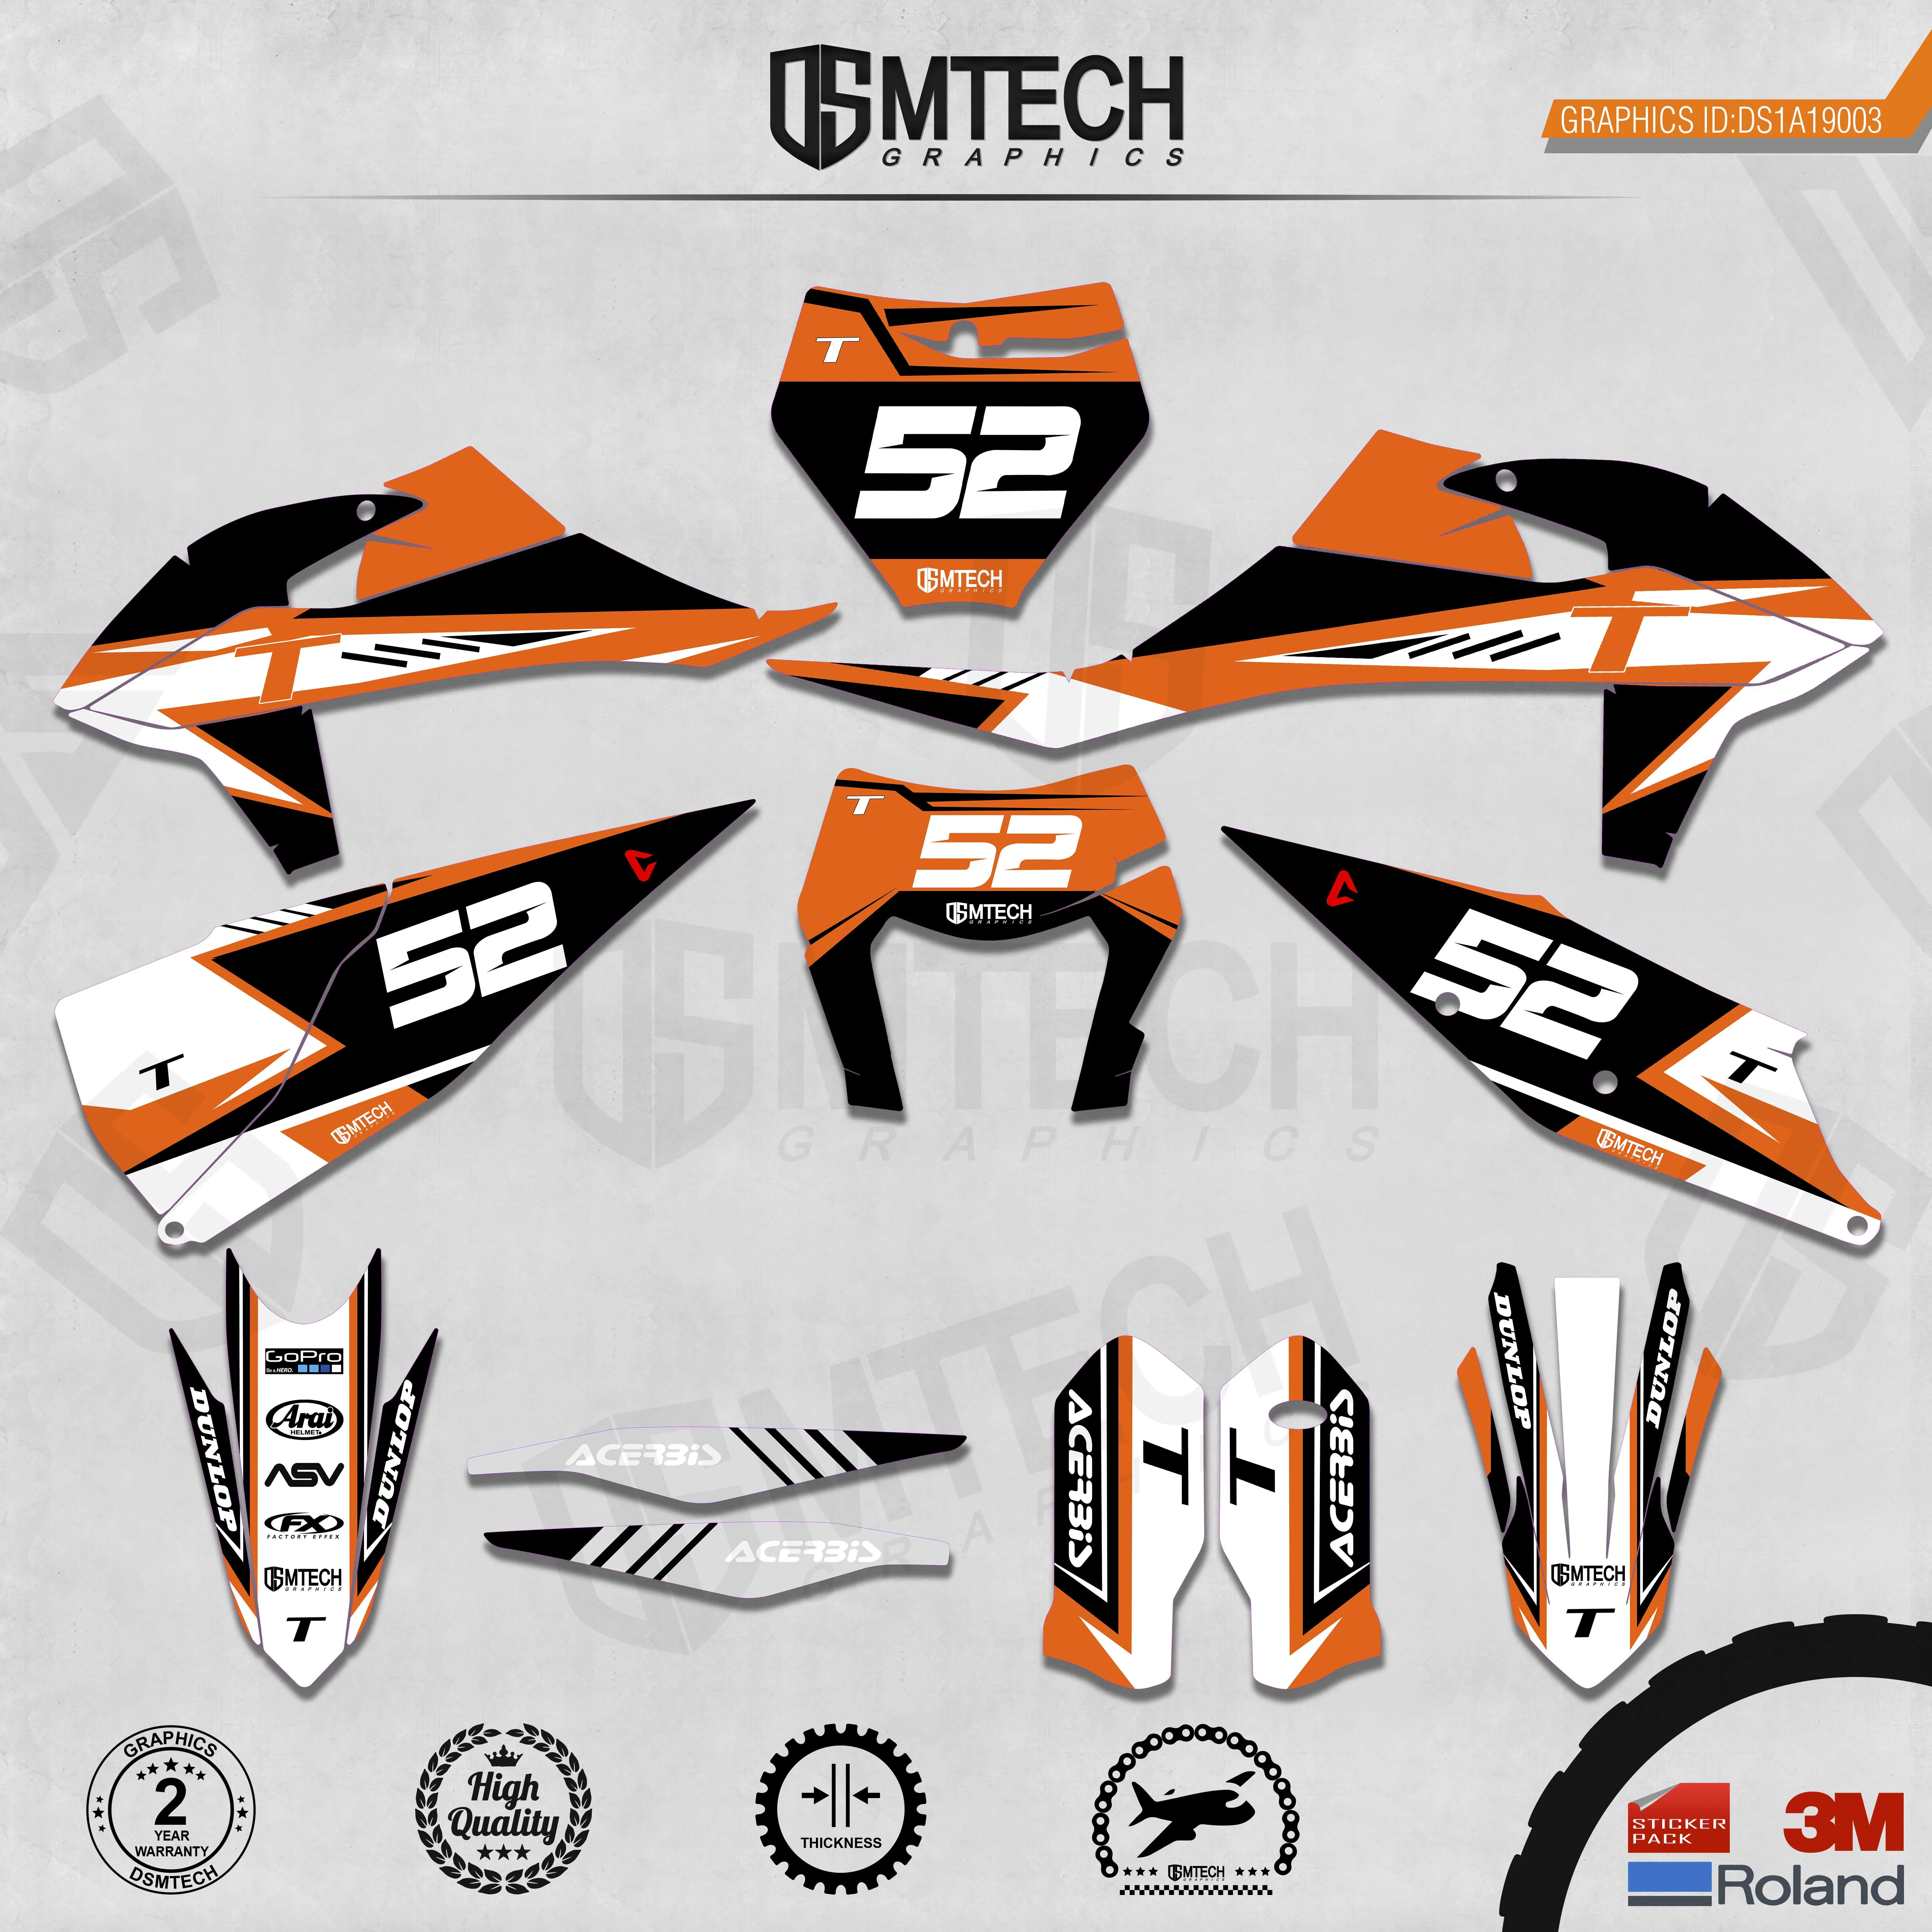 DSMTECH Customized Team Graphics Backgrounds Decals 3M Custom Stickers For 2019-2020 SXF 2020-2021EXC 003